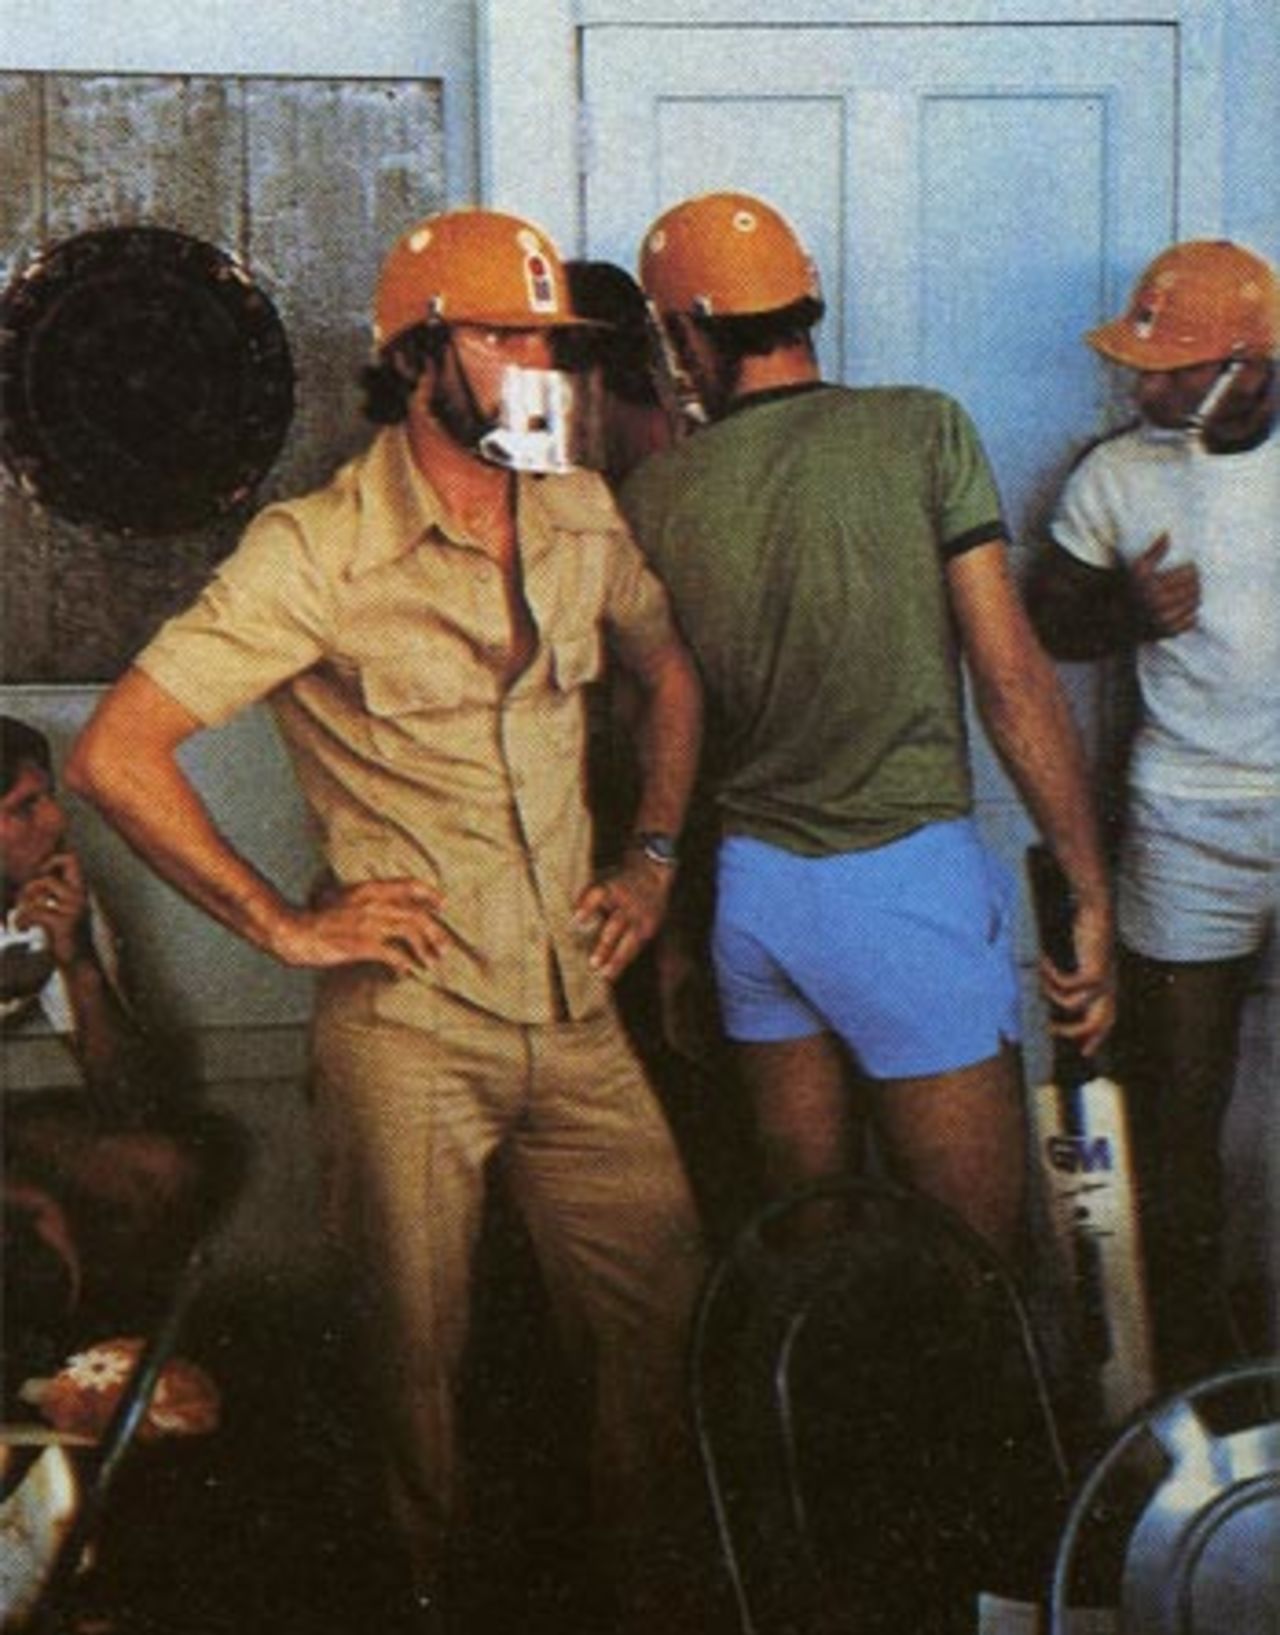 Australian players shelter from the riot - from left to right, Jeff Thomson, Kepler Wessels, Rick McCosker and Len Pascoe, WSC West Indies v WSC Australia, Guyana, March 25, 1979